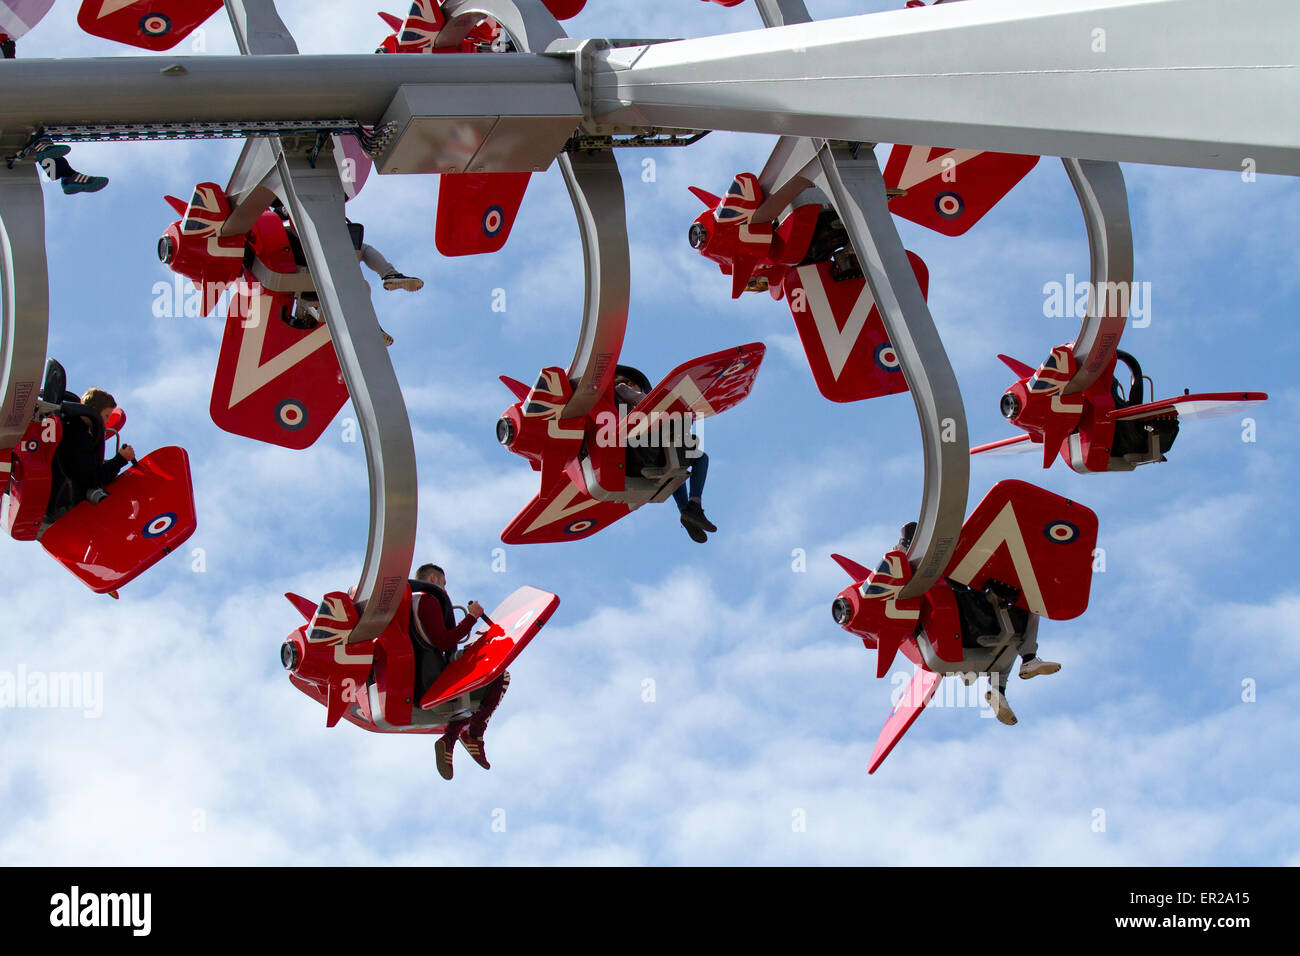 Red Arrow Sky Force Opens Blackpool Pleasure beach amusement Park Lancashire, UK. May, 2015.  The launch of the new ride, Red Arrows Skyforce, is the world's first Red Arrows Ride complete in RAF livery and is a new airborne adventure and display for riders. The 72 ft white-knuckle ride allows riders to spin glide, and swirl as pilots take control of their own aeroplane in formation. Stock Photo